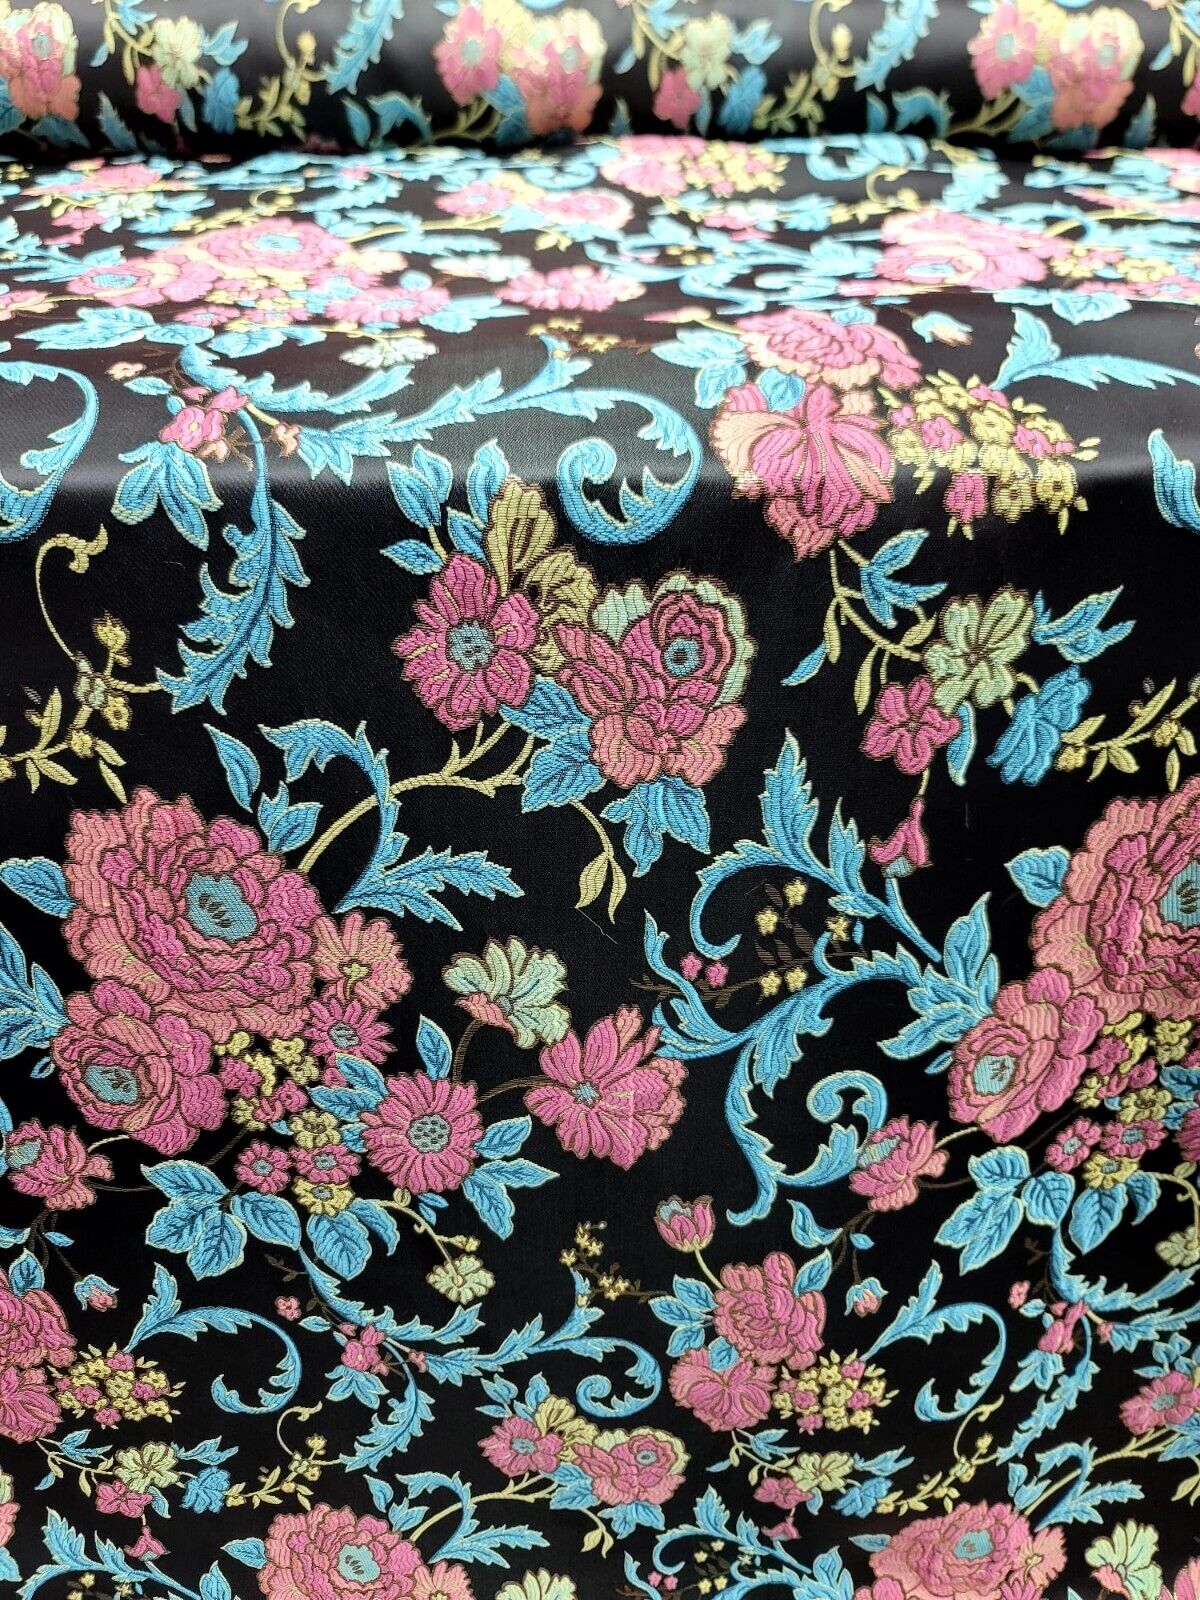 Brocade Multicolor Floral Turquoise Pink Black Jacquard Fabric By The Yard Dress